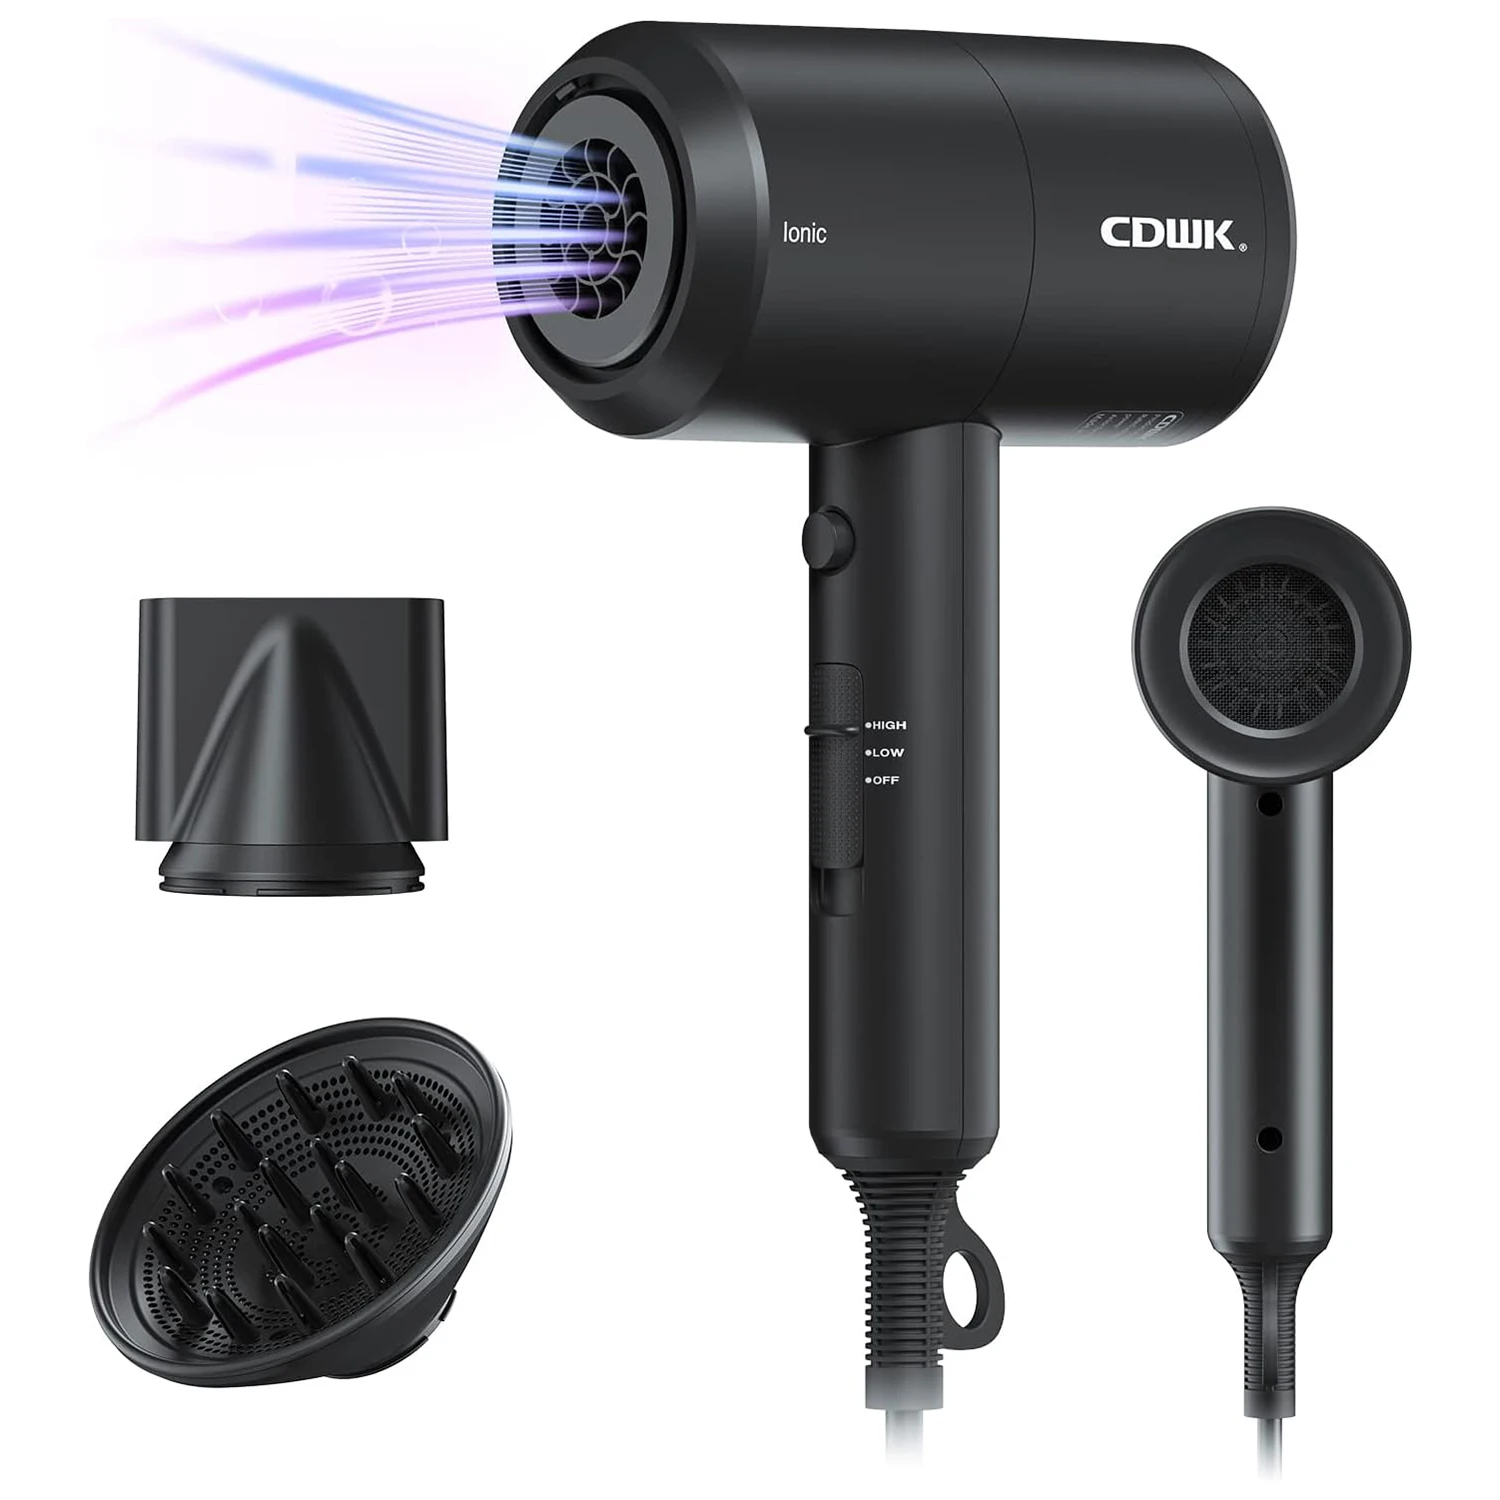 Professional Ionic Negative Hair Dryer with Diffuser 1800W Fast Drying Hair Dryers for Curly Straight Hair Travel Portable allpowers r1500 portable power station 1152wh lifepo4 battery with 1800w 3000w peak ac output solar generator for garden party